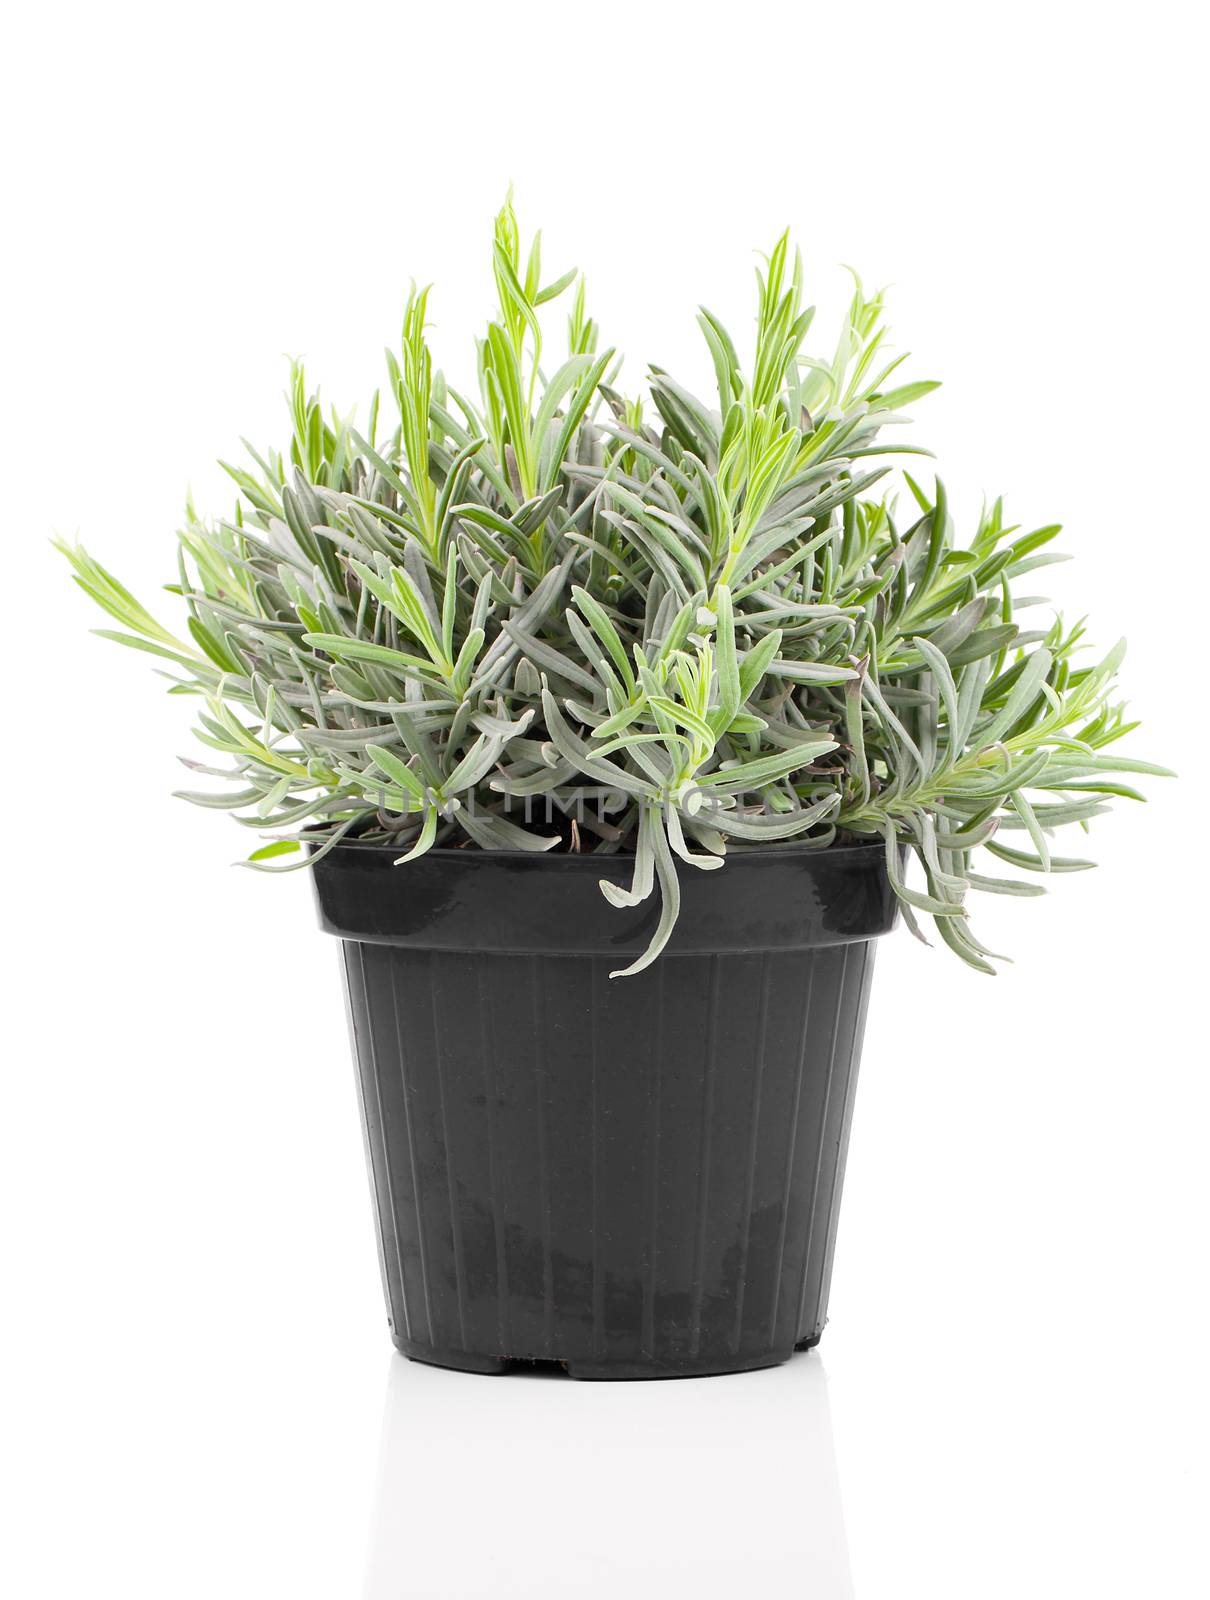 Lavender in a pot, on white background